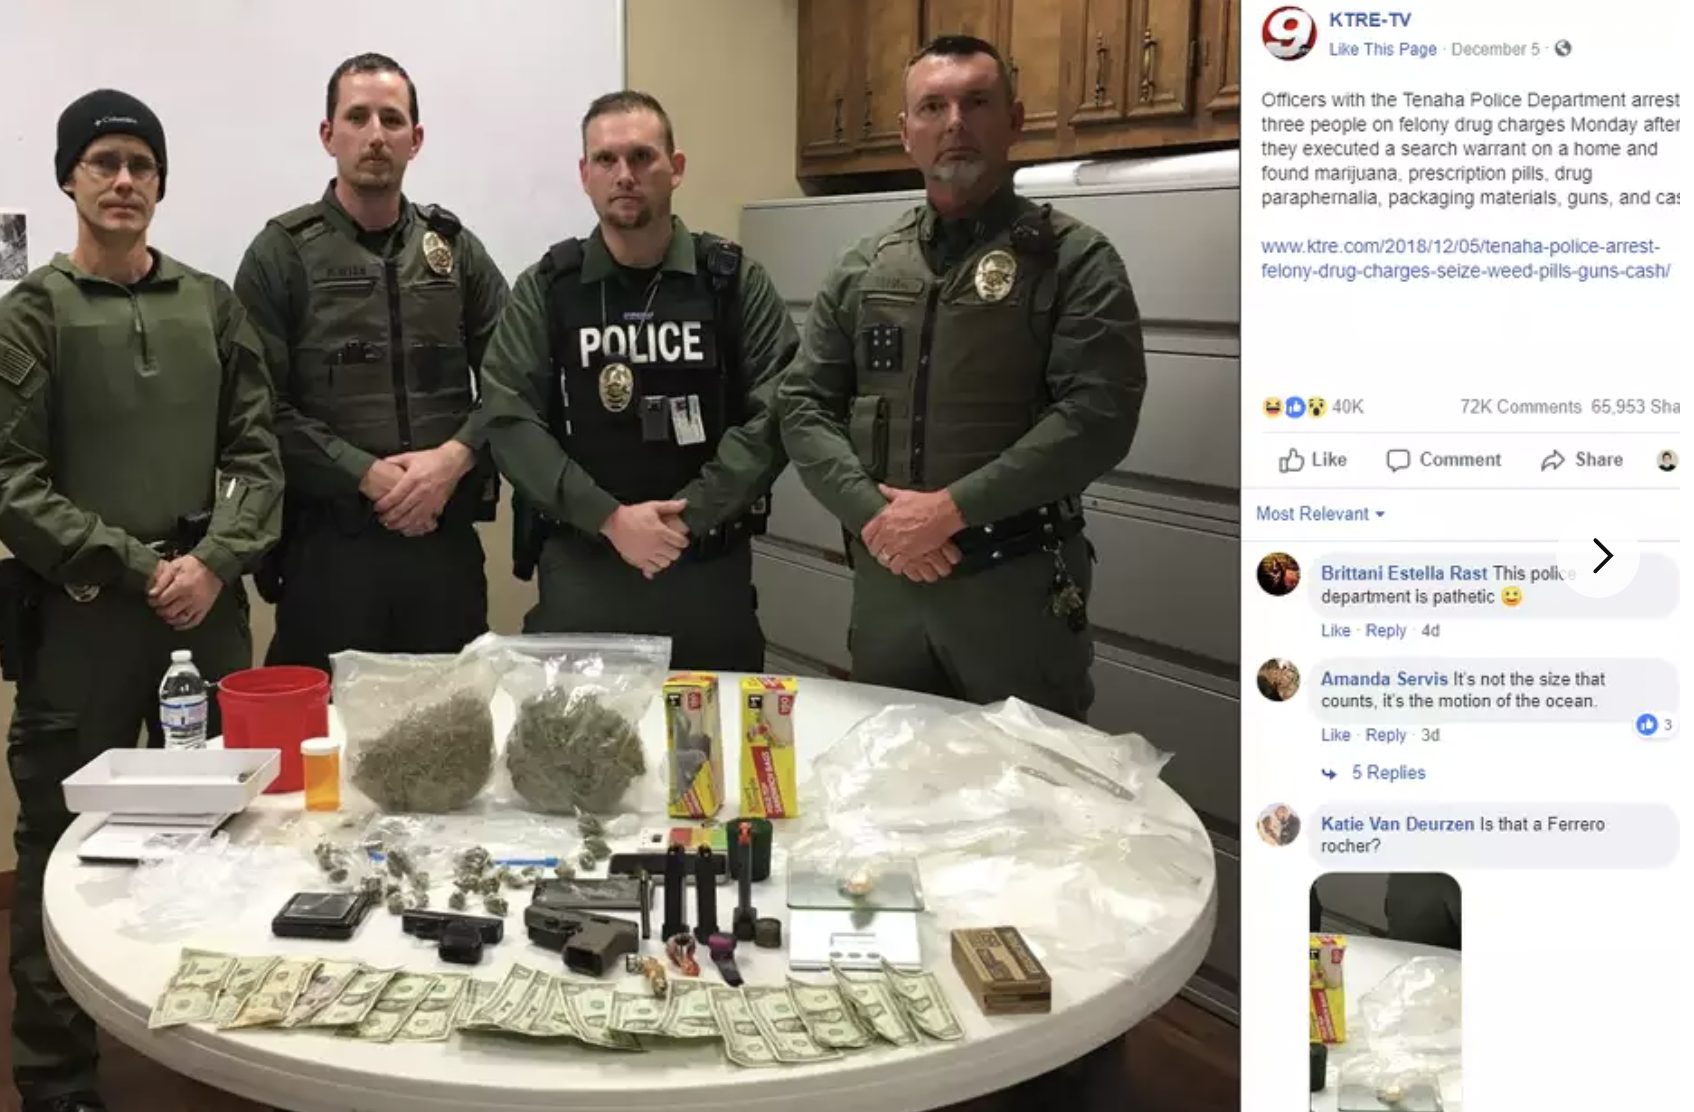 military officer - Police KtreTv This Page December Officers with the Tenaha Police Department arrest three people on felony drug charges Monday after they executed a search warrant on a home and found marijuana prescription pills, drug paraphemalia, pack